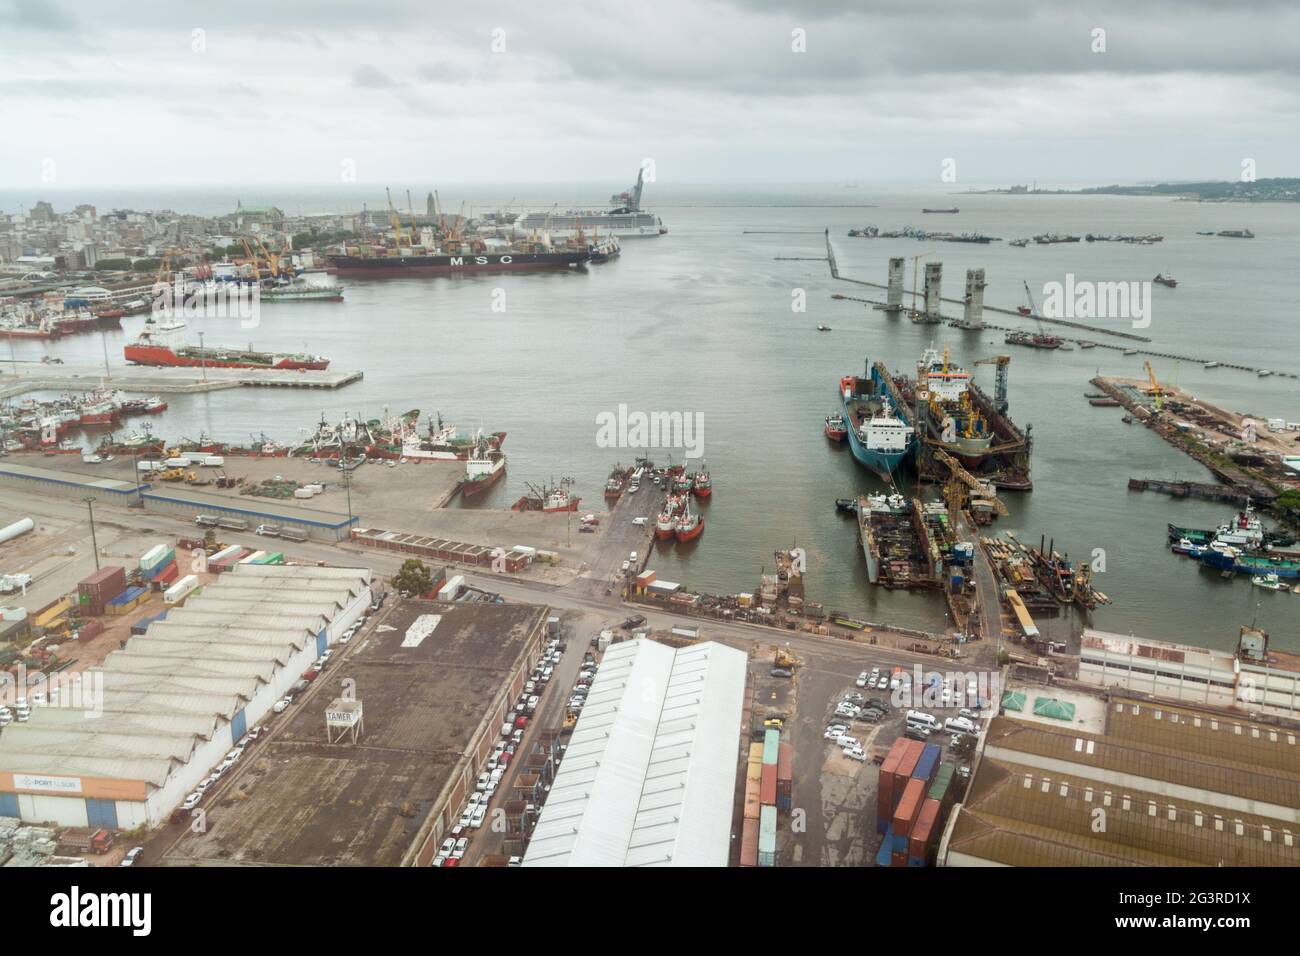 MONTEVIDEO, URUGUAY - FEB 19, 2015: Aerial view of a port in Montevideo, Uruguay Stock Photo